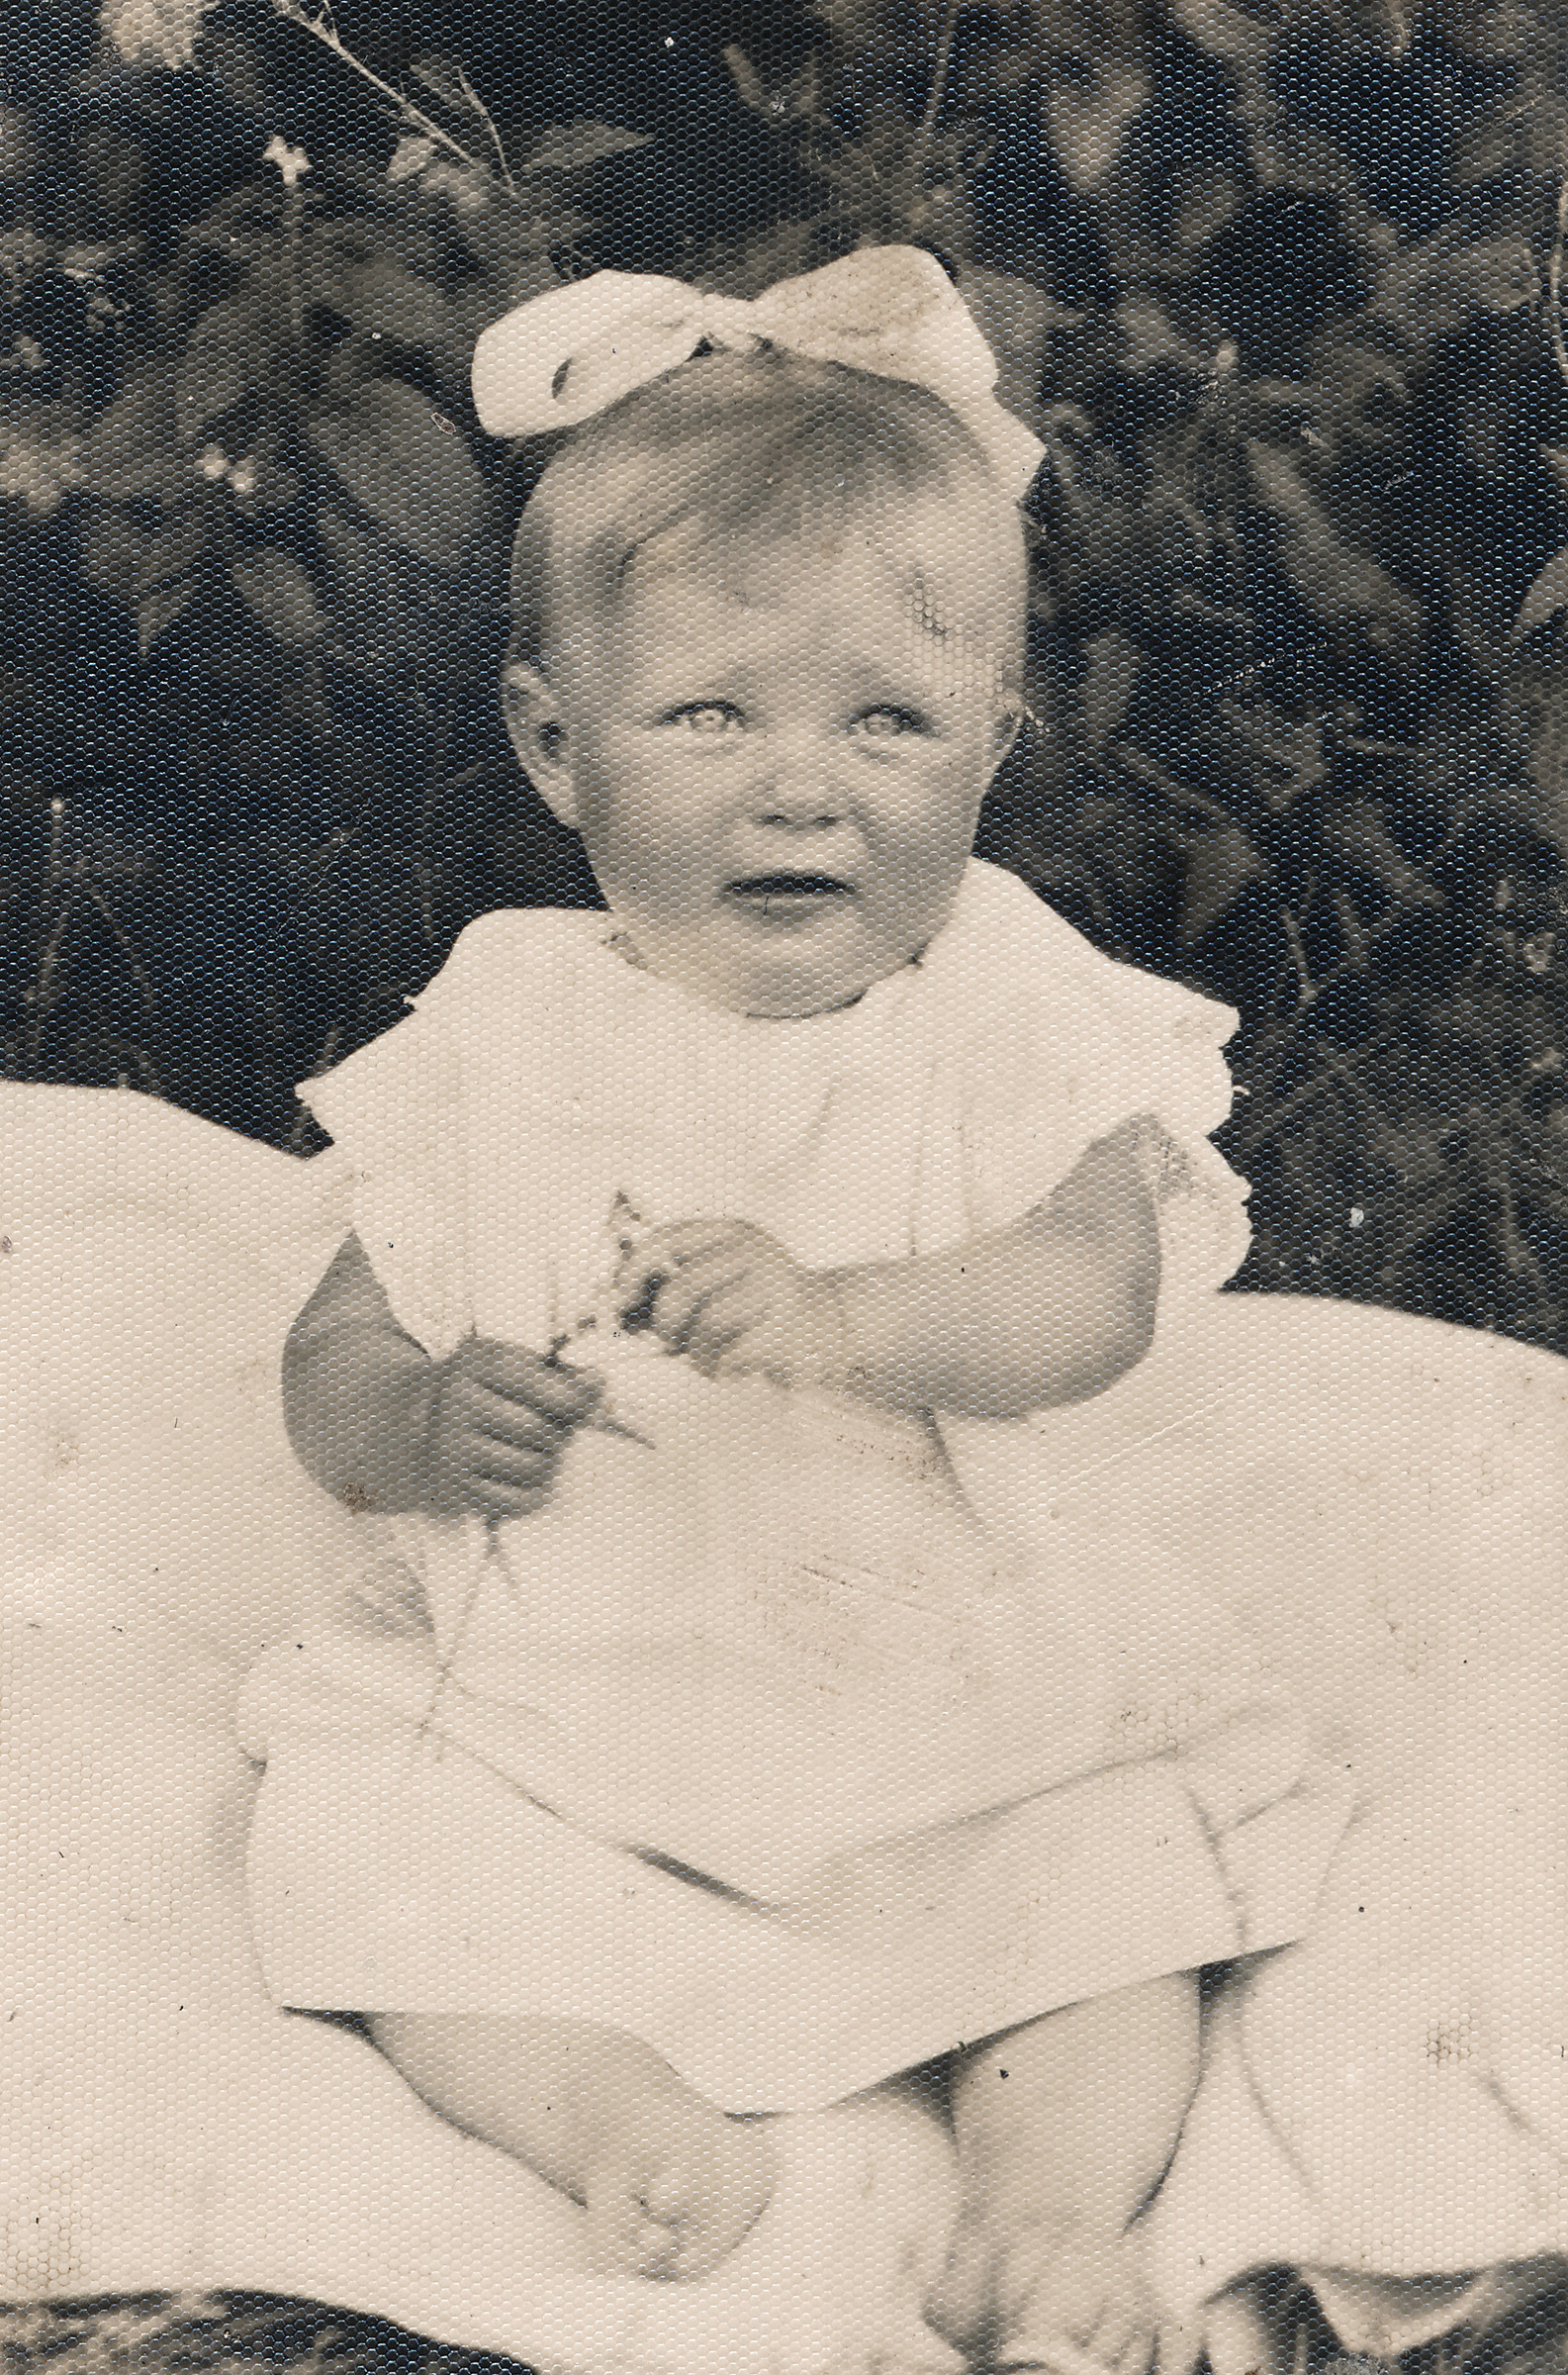 Dobromila baptised in the age of 9 months, 1933